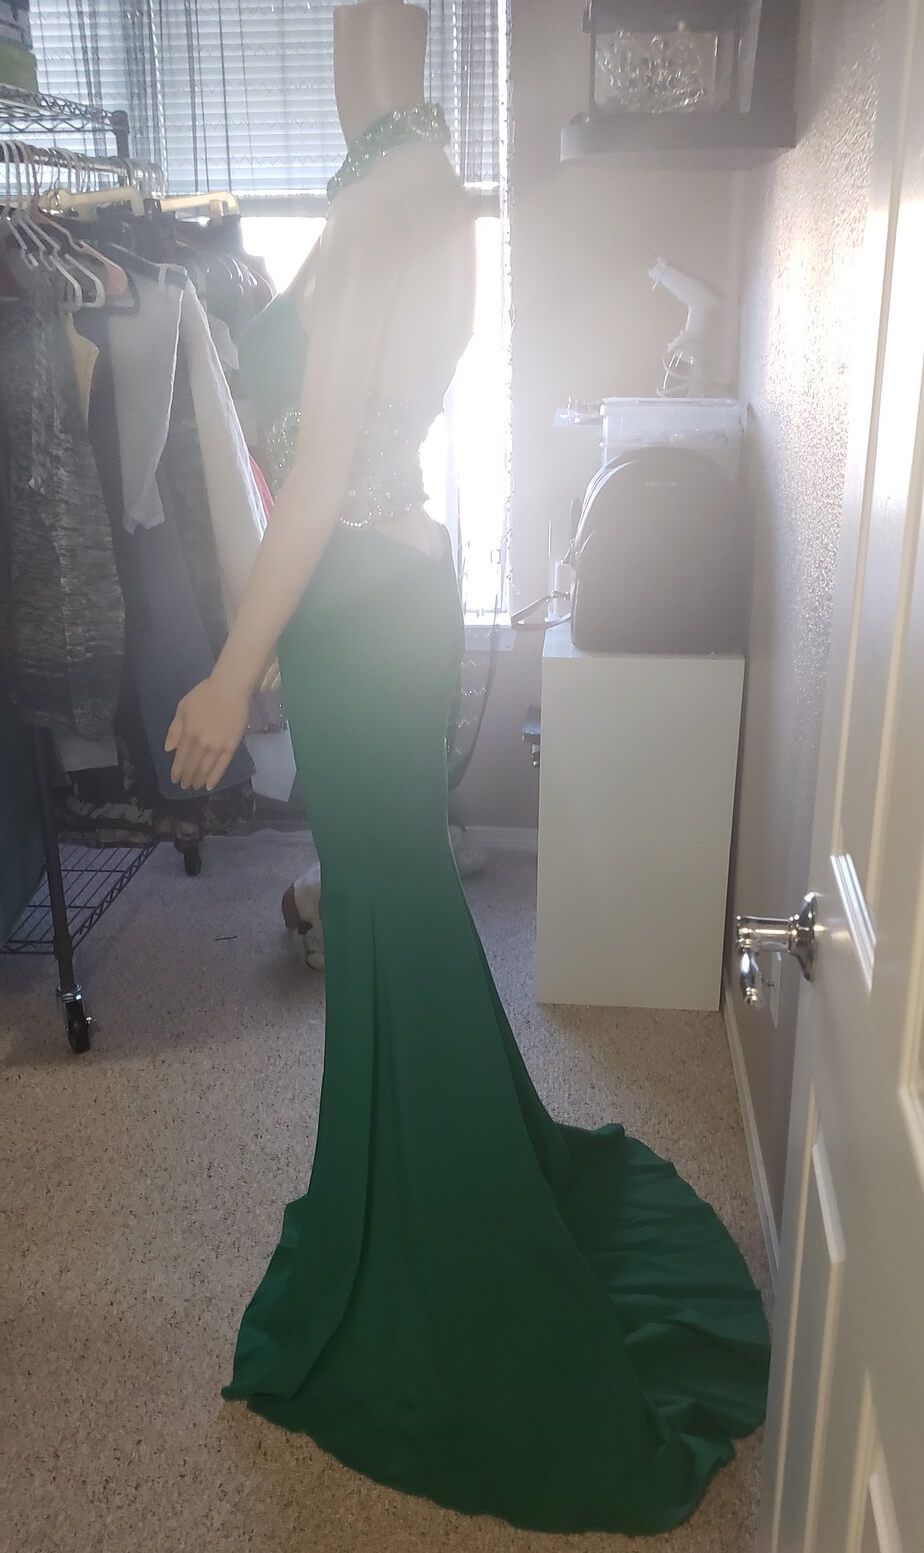 Green Size 2 Train Dress on Queenly